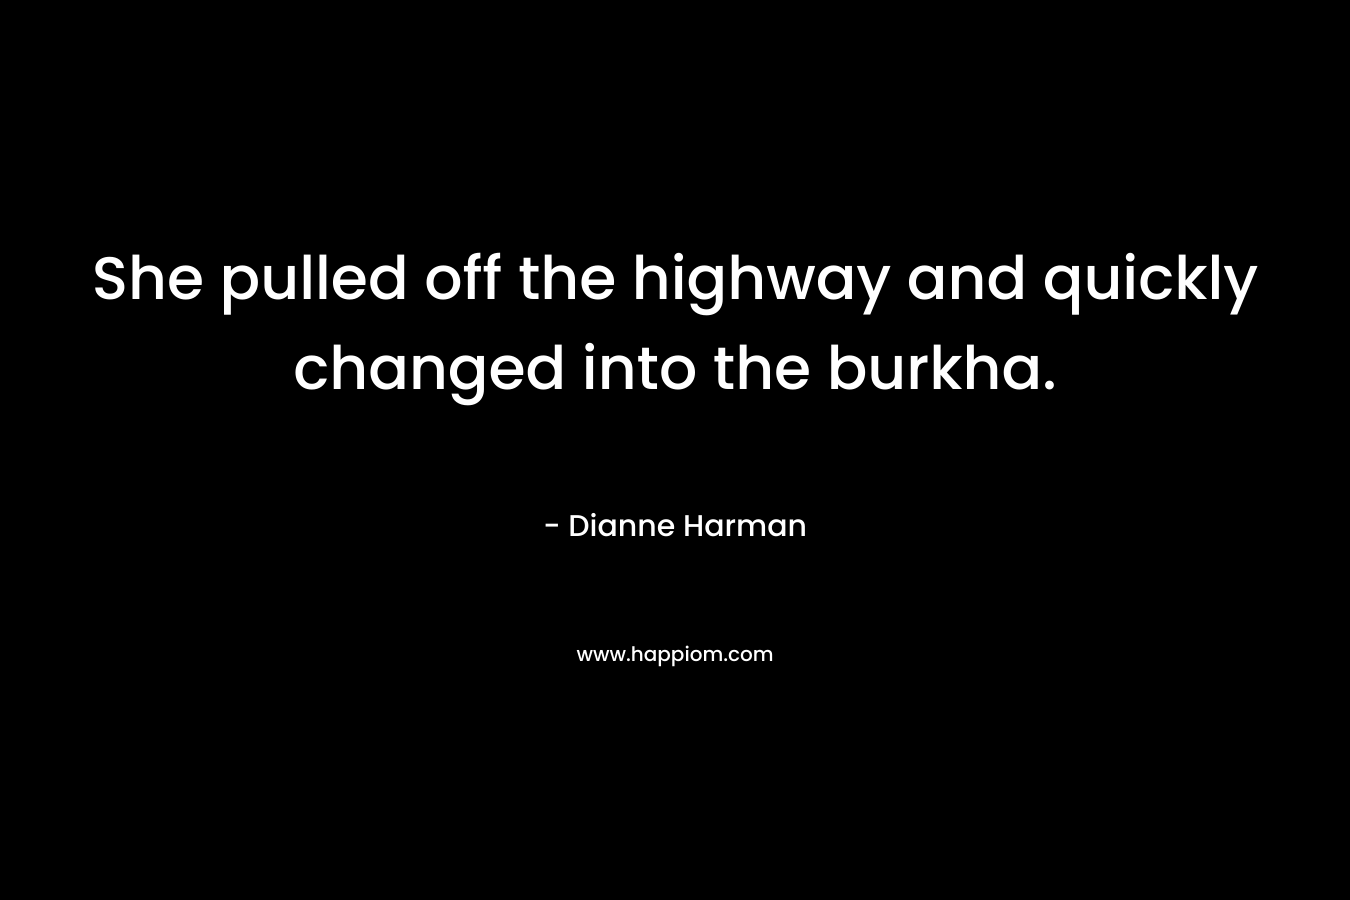 She pulled off the highway and quickly changed into the burkha. – Dianne Harman